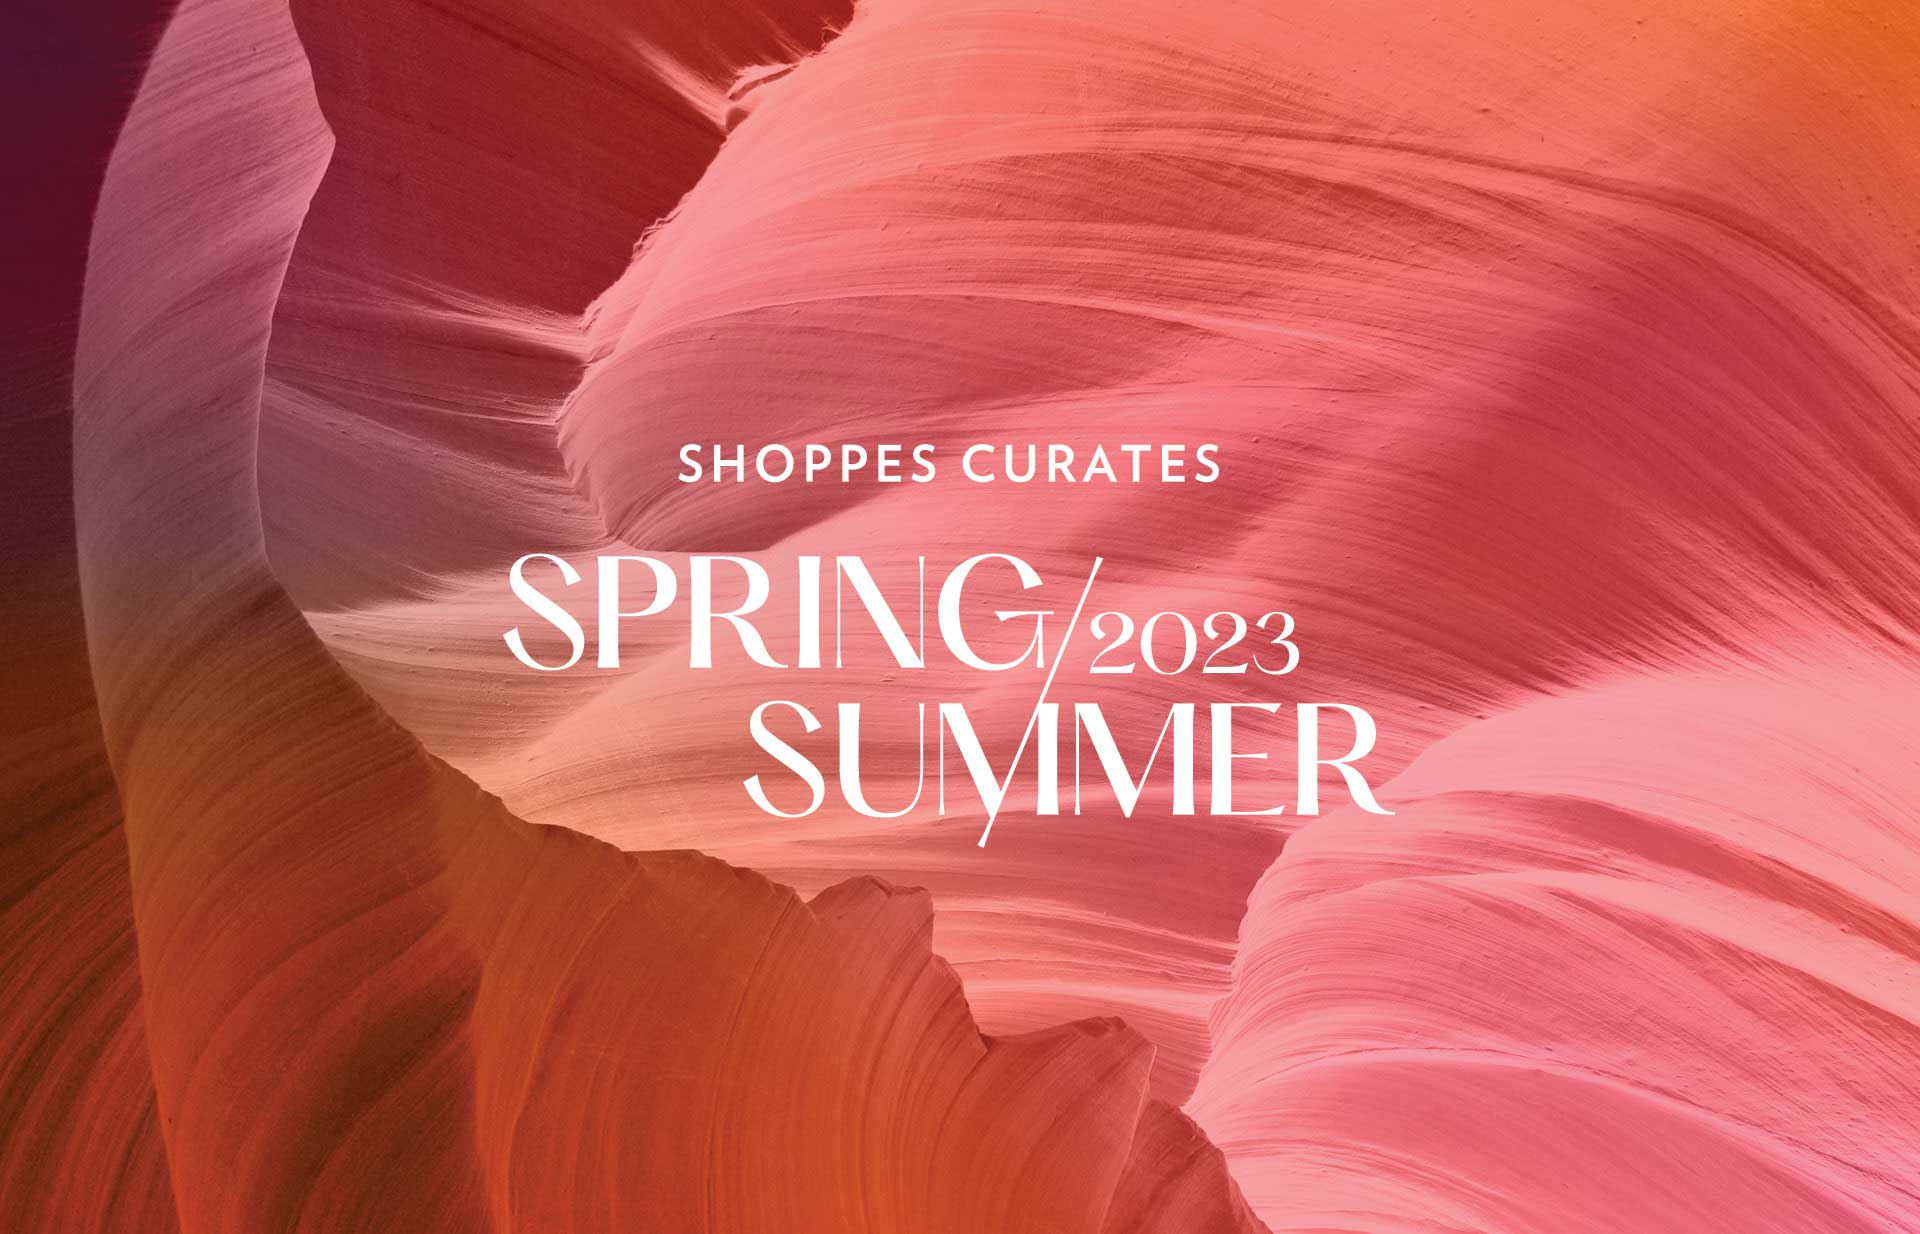 Shopping Curates